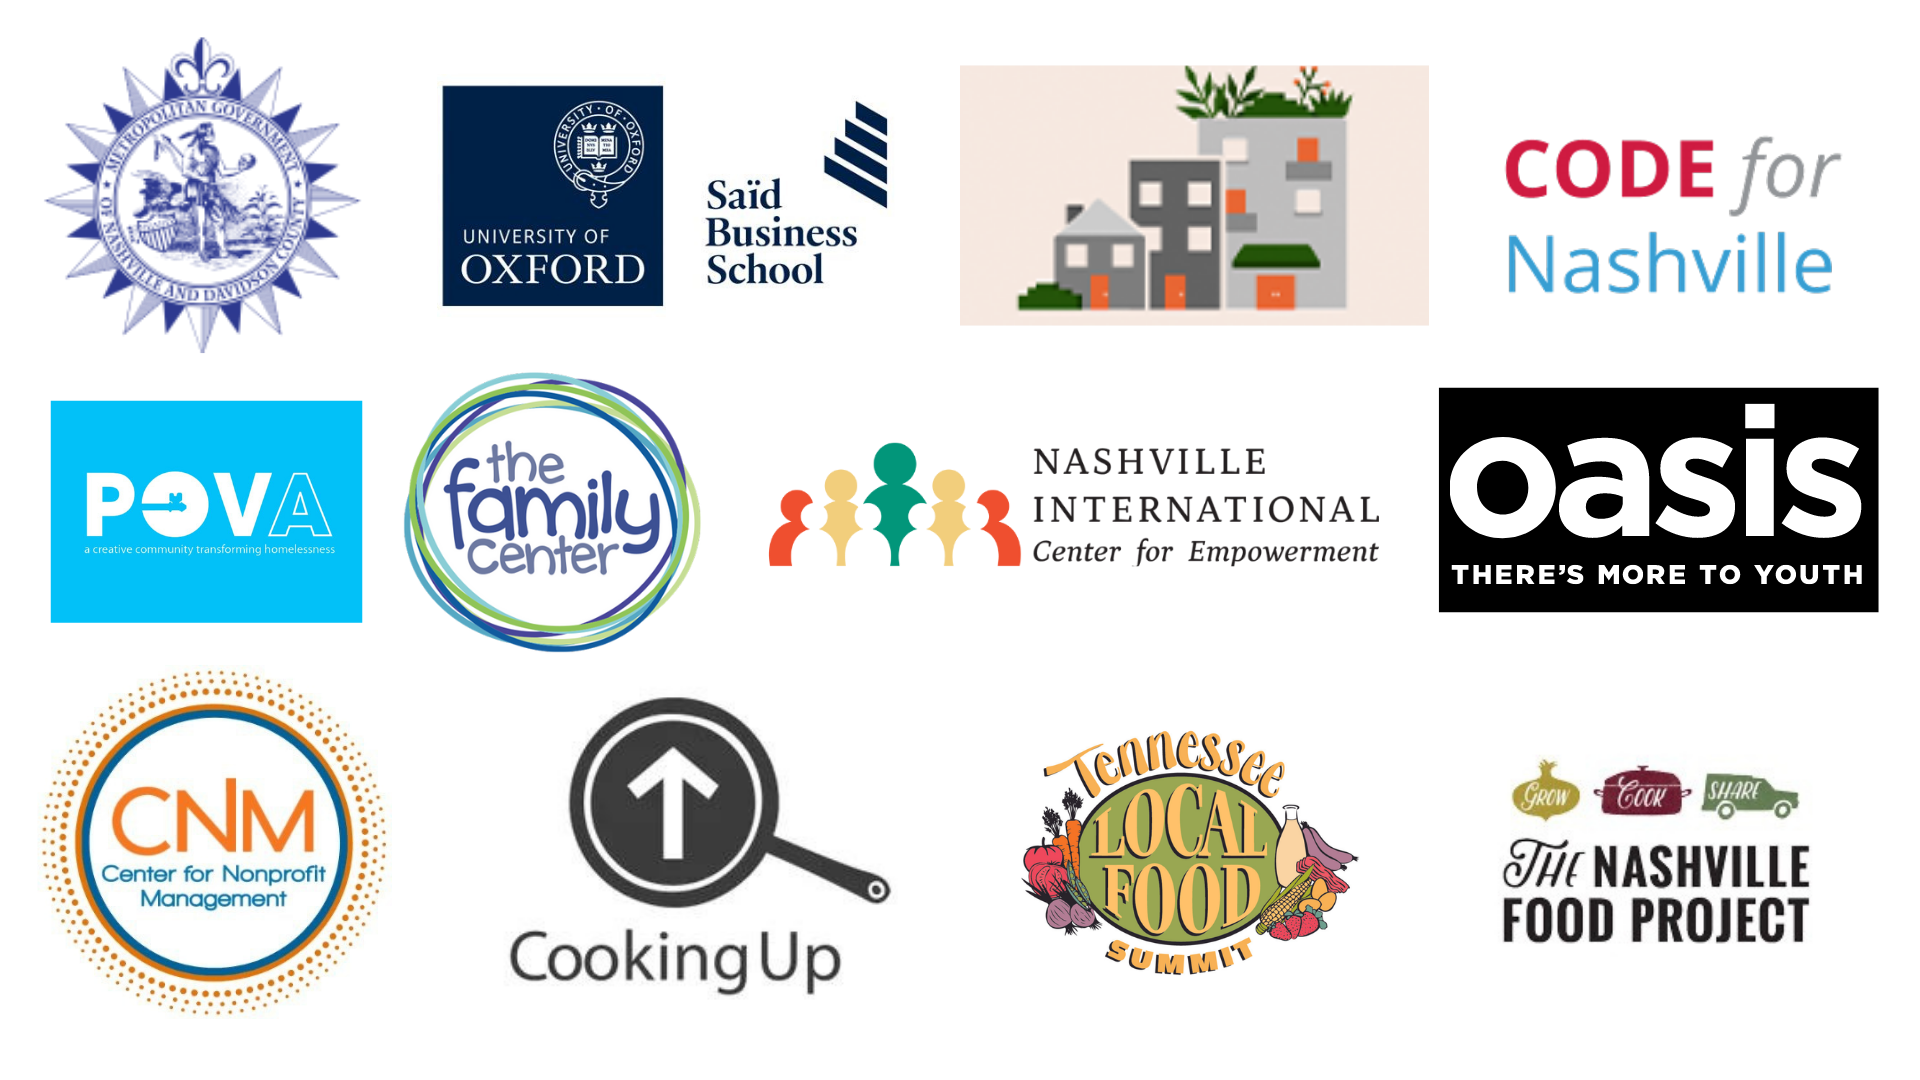 Logos: Cooper Davidson Seal, University of Oxford, Said Business School, Nashville Upcycle, Code for Nashville, POVA, the Family Center, Nashville International Center for Empowerment, OASIS, Center for Nonprofit Management, Cooking Up, TN Local Food Summit, The Nashville Food Project